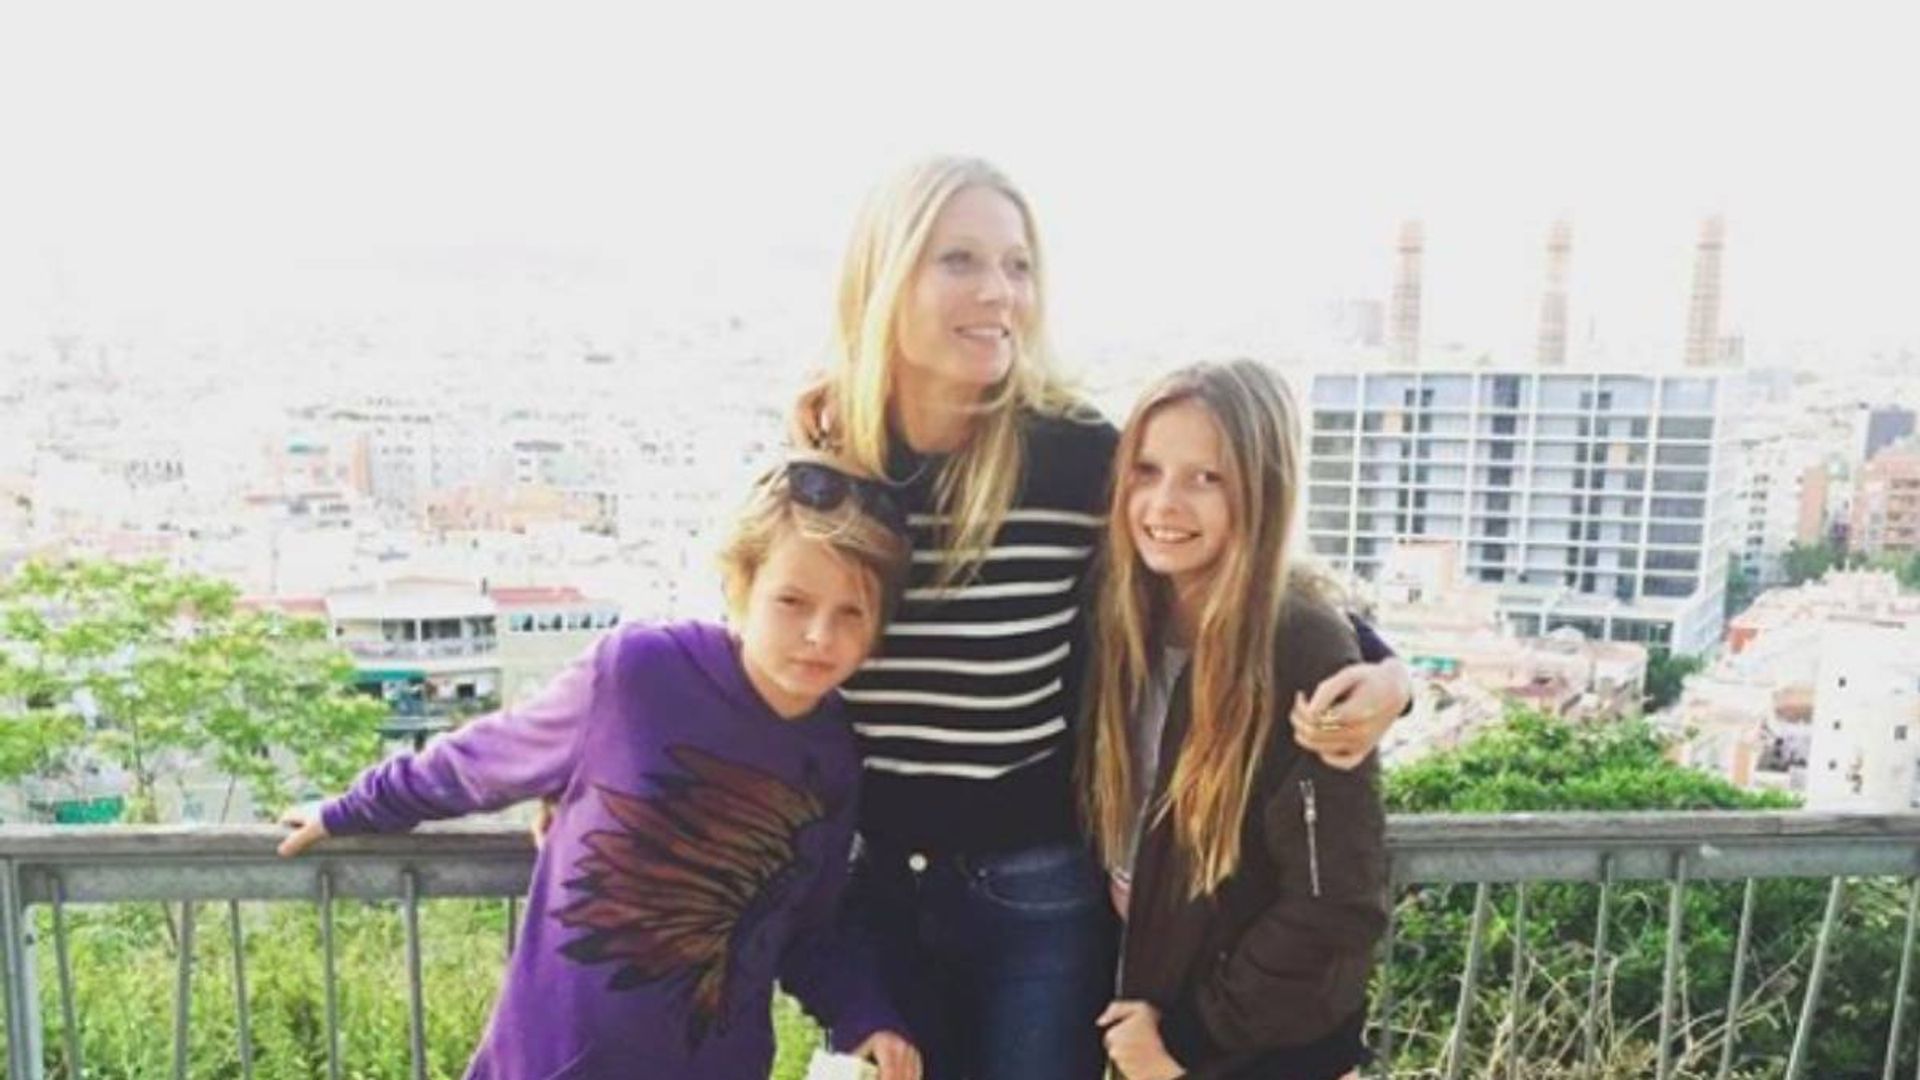 Gwyneth Paltrow surprises with rare photo of both her children